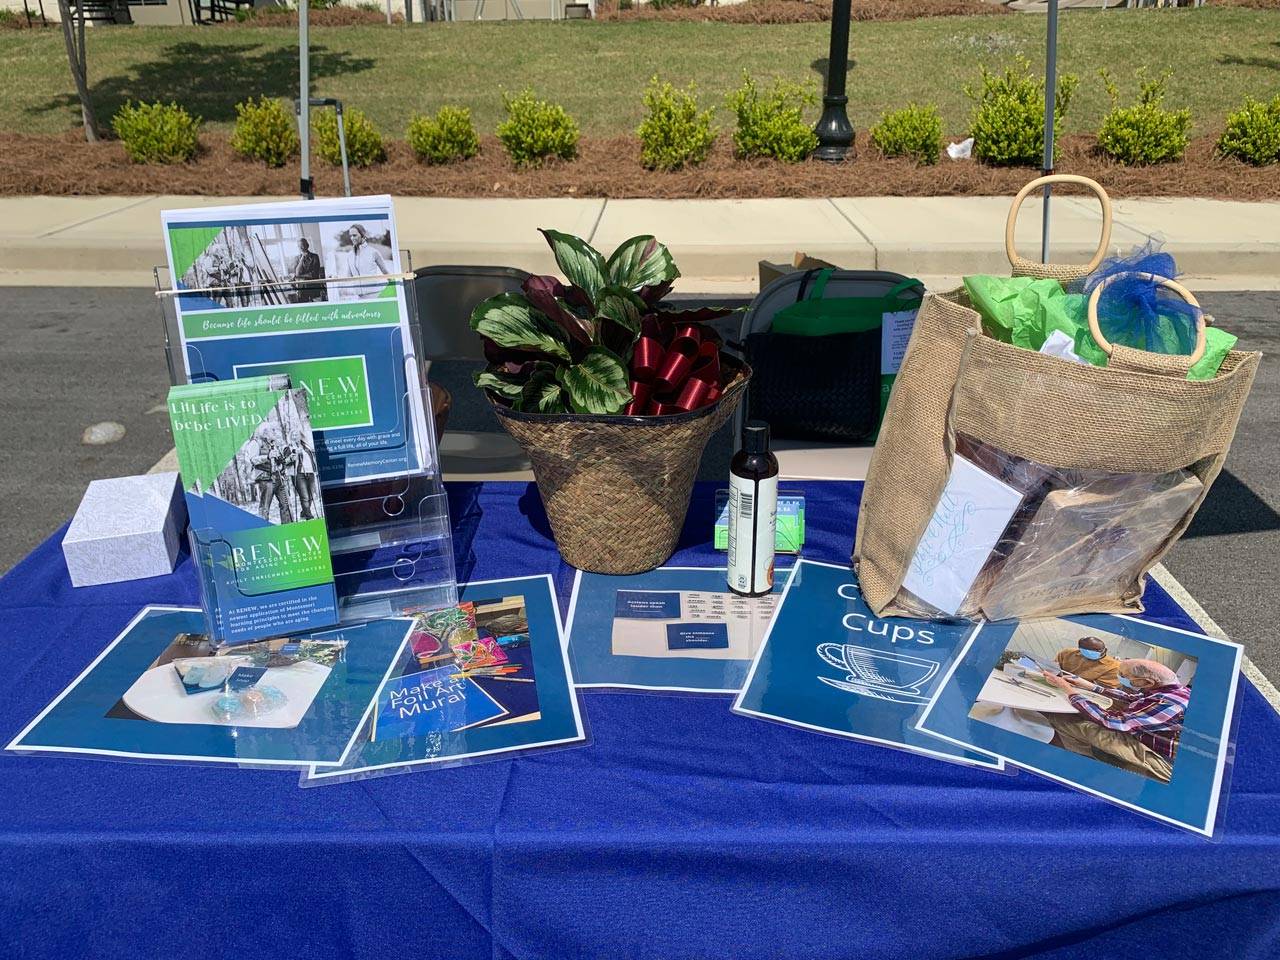 Table display with informational materials about Renew